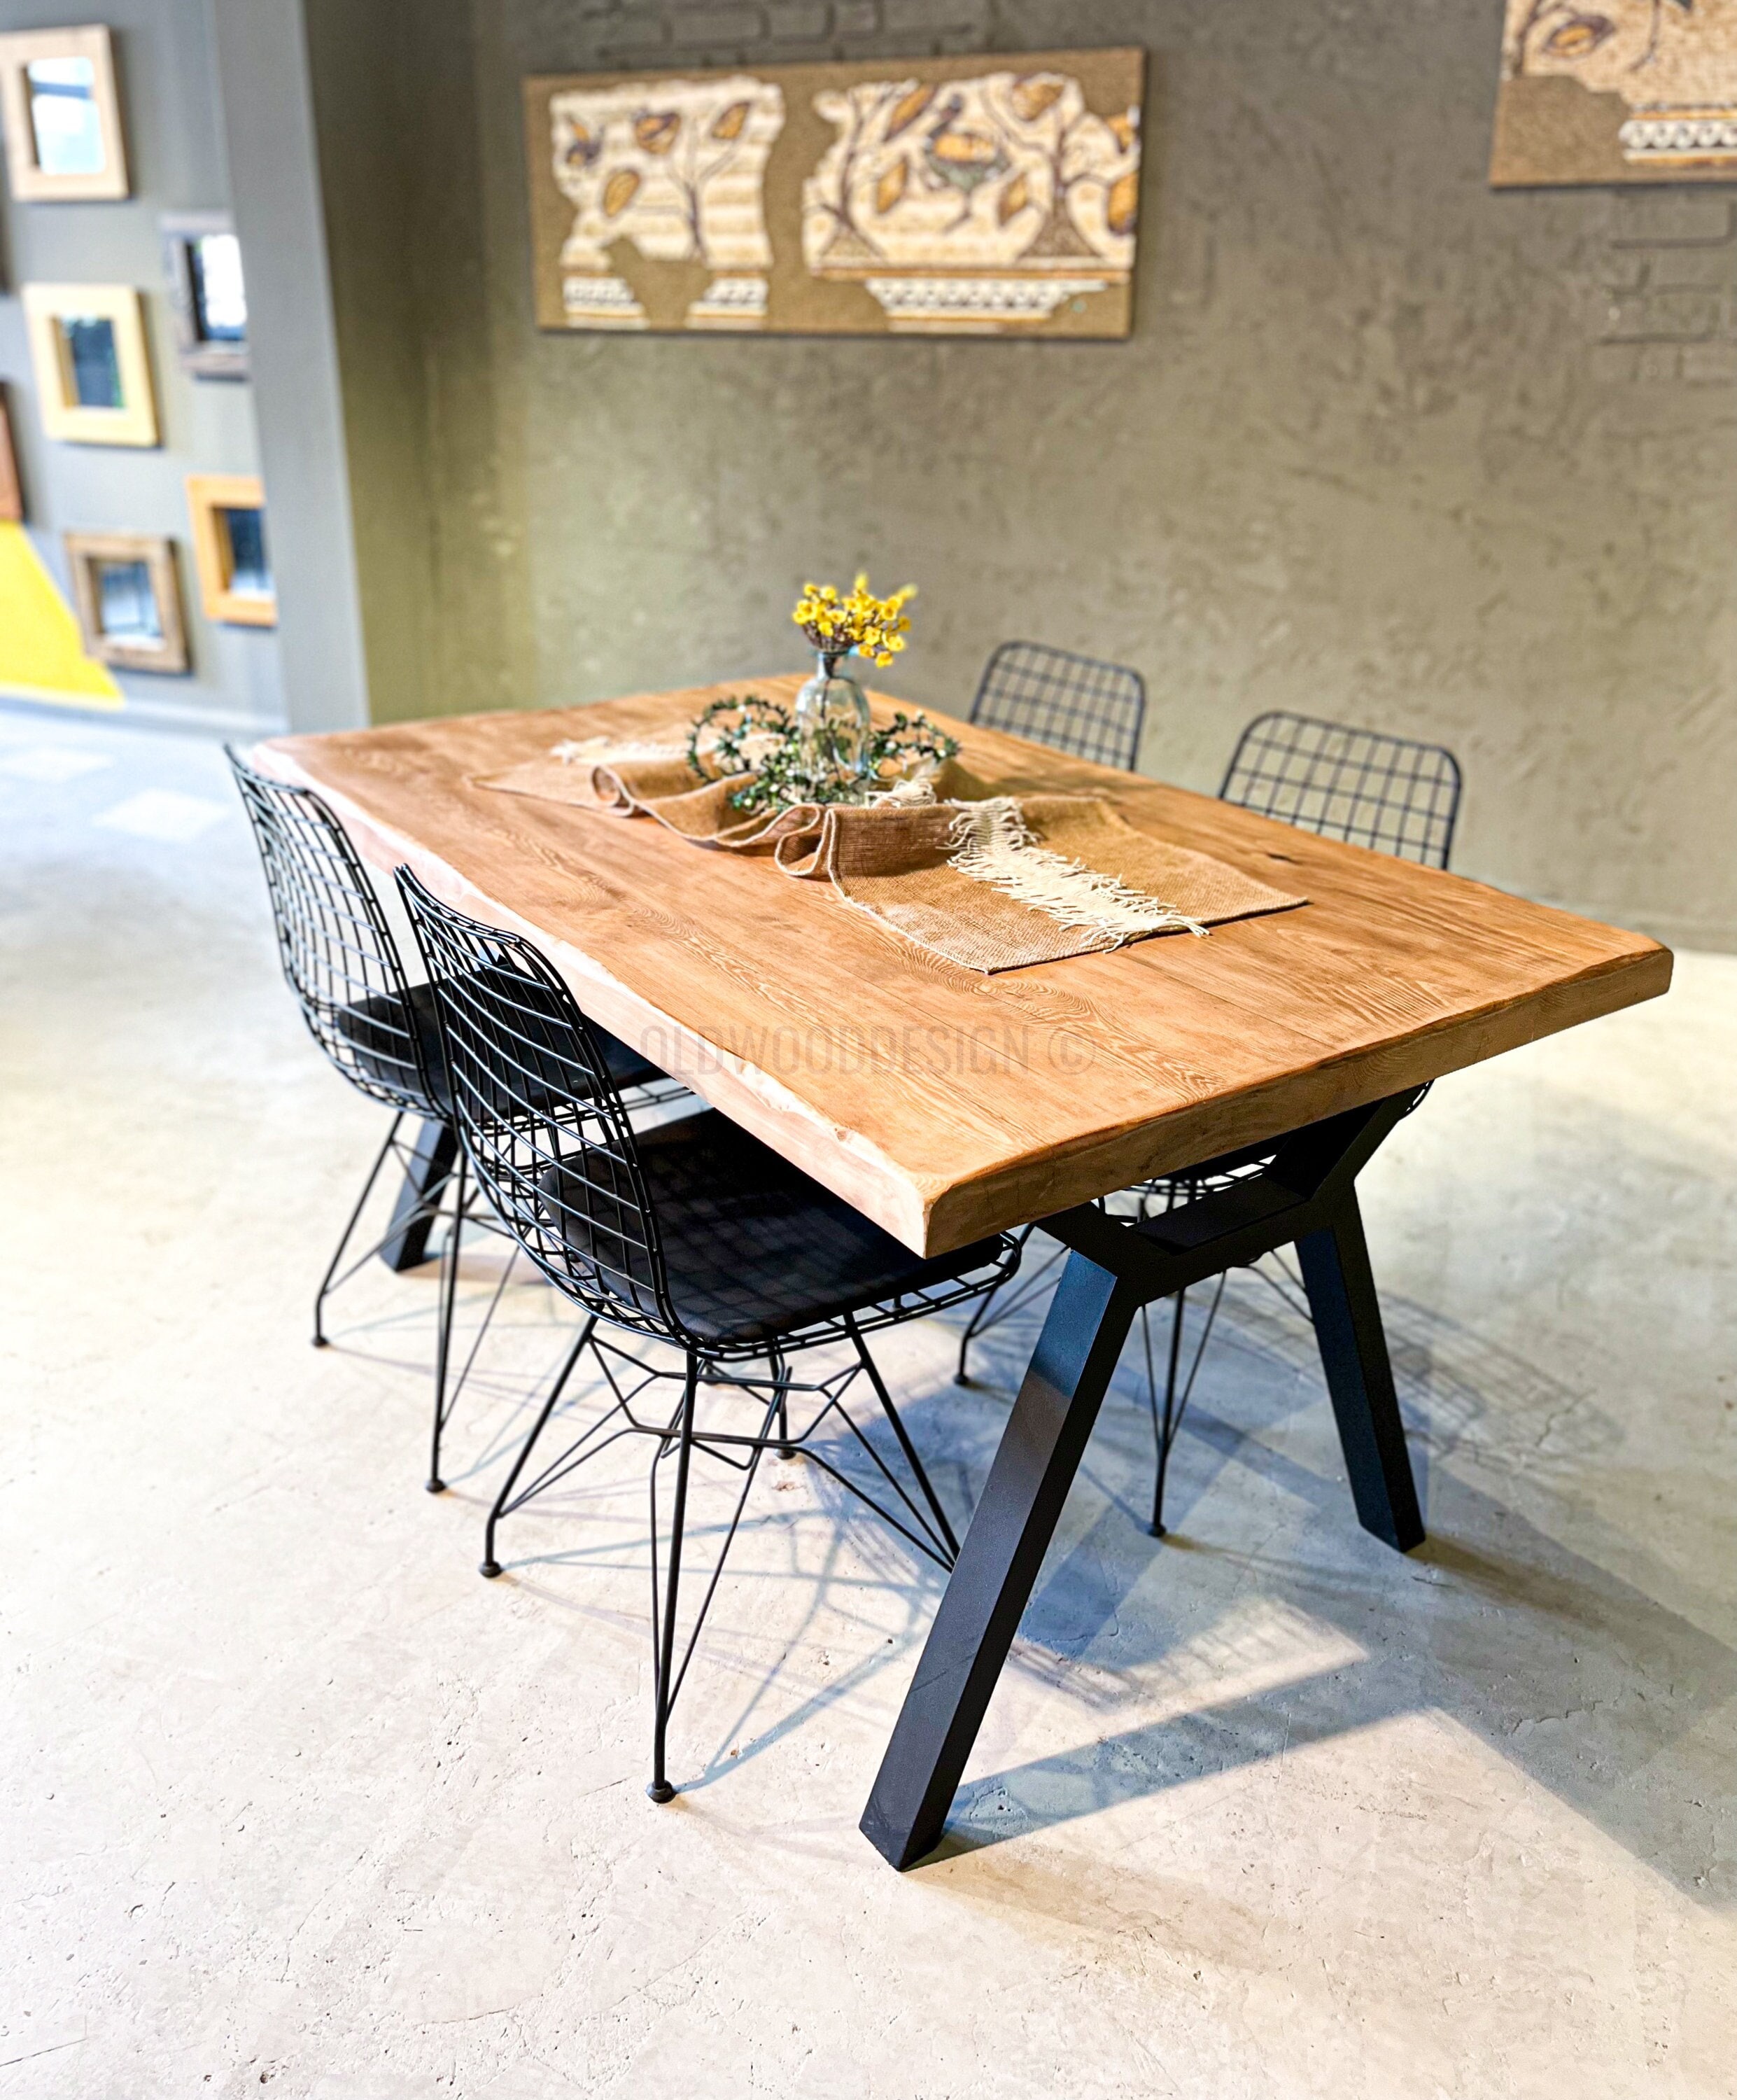 Rustic Wood Dining Table Solid Wood Table With Metal Legs Writing ...